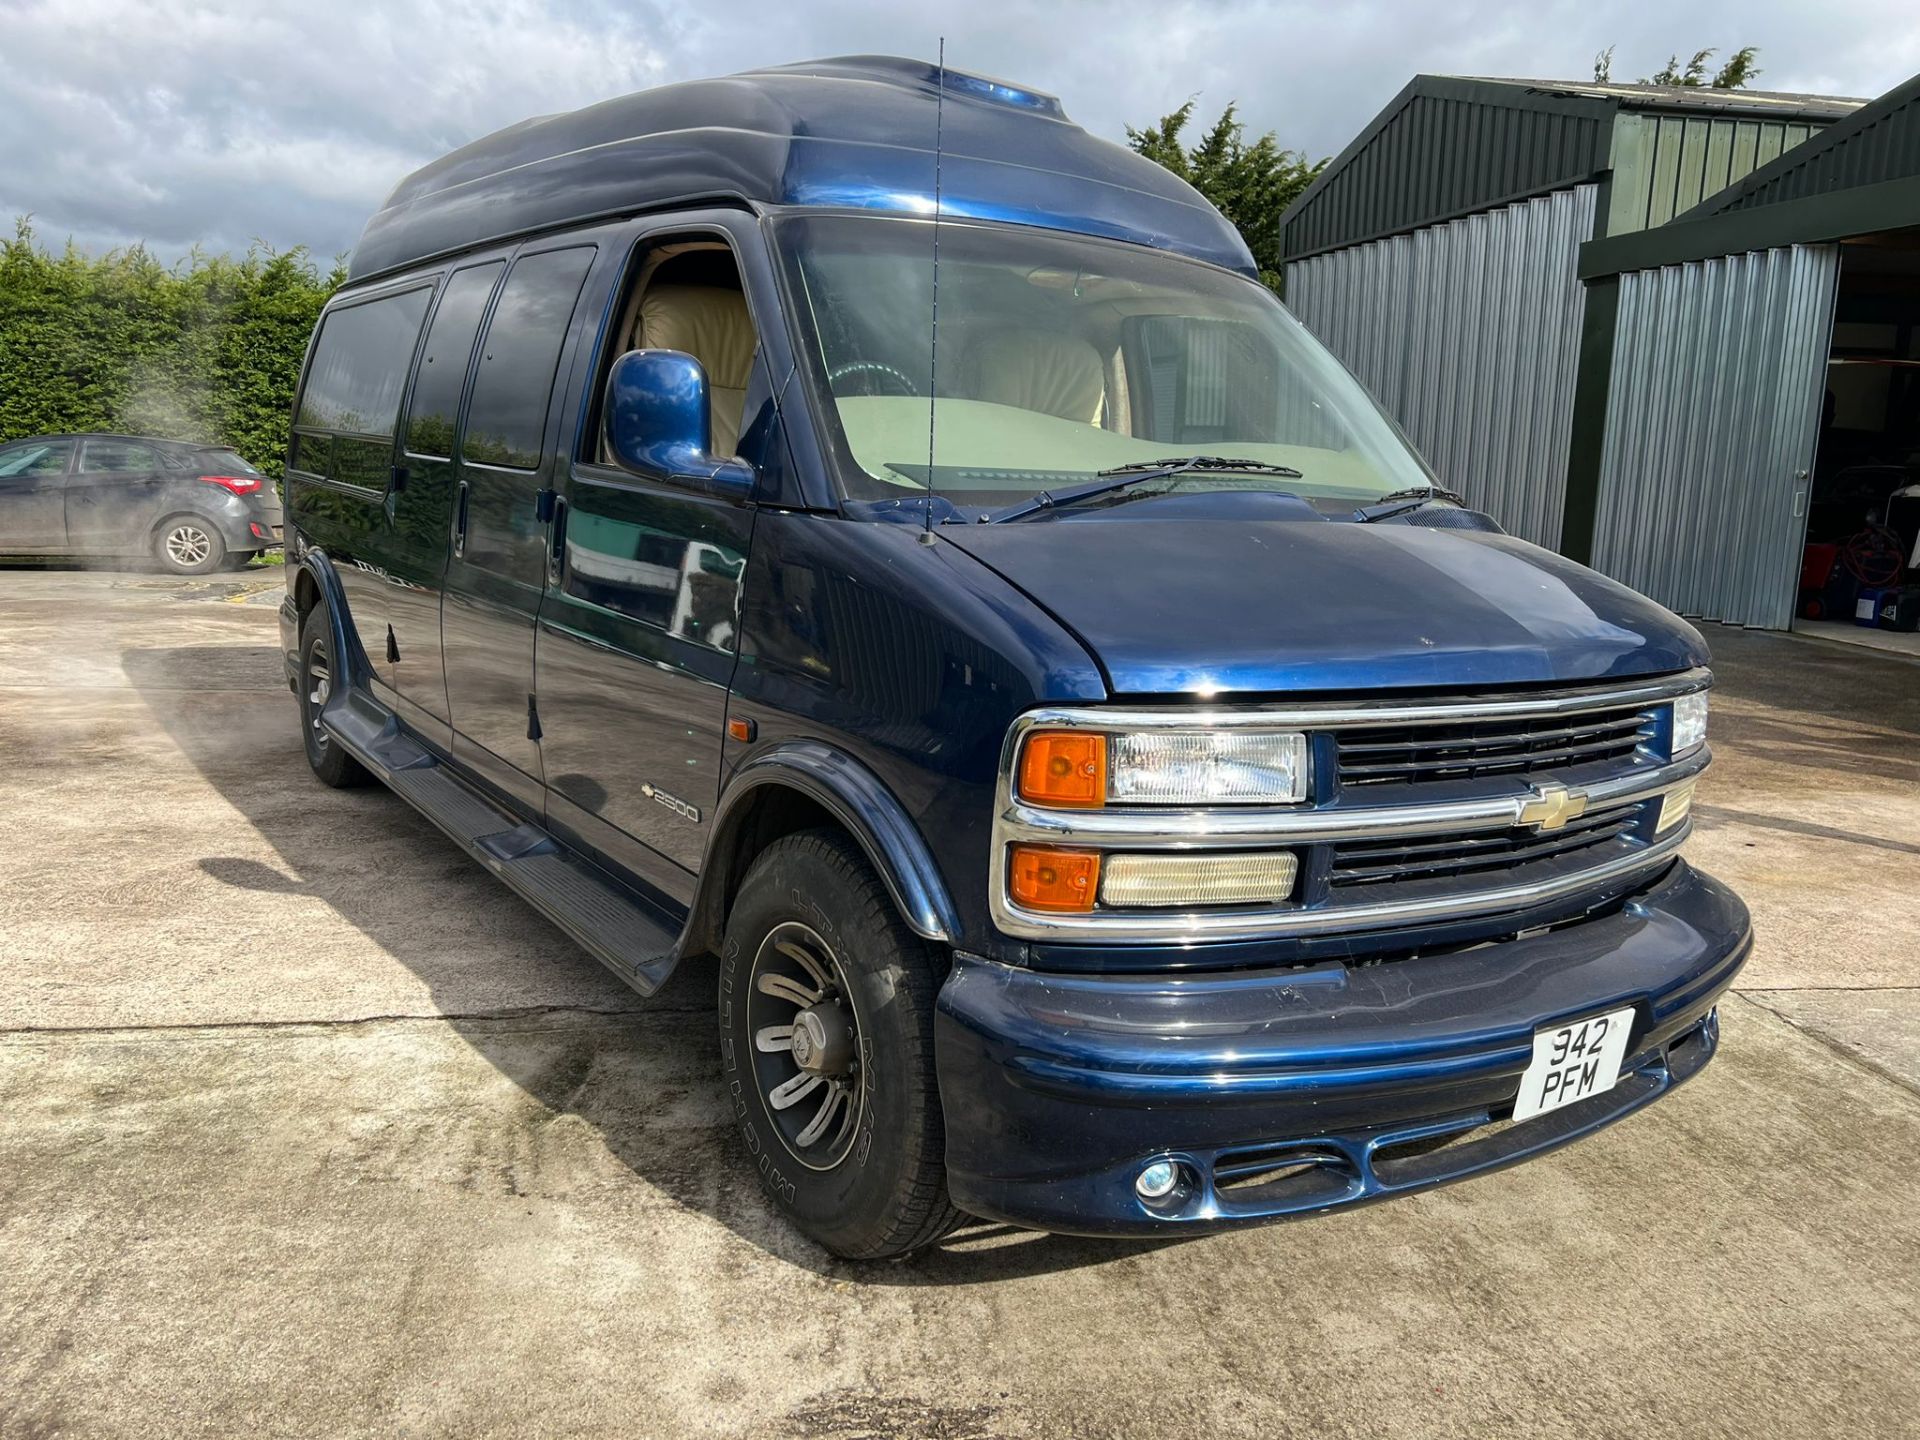 Chevrolet Express 2500 Eight Seat Luxury Bus 2001 - Image 12 of 16